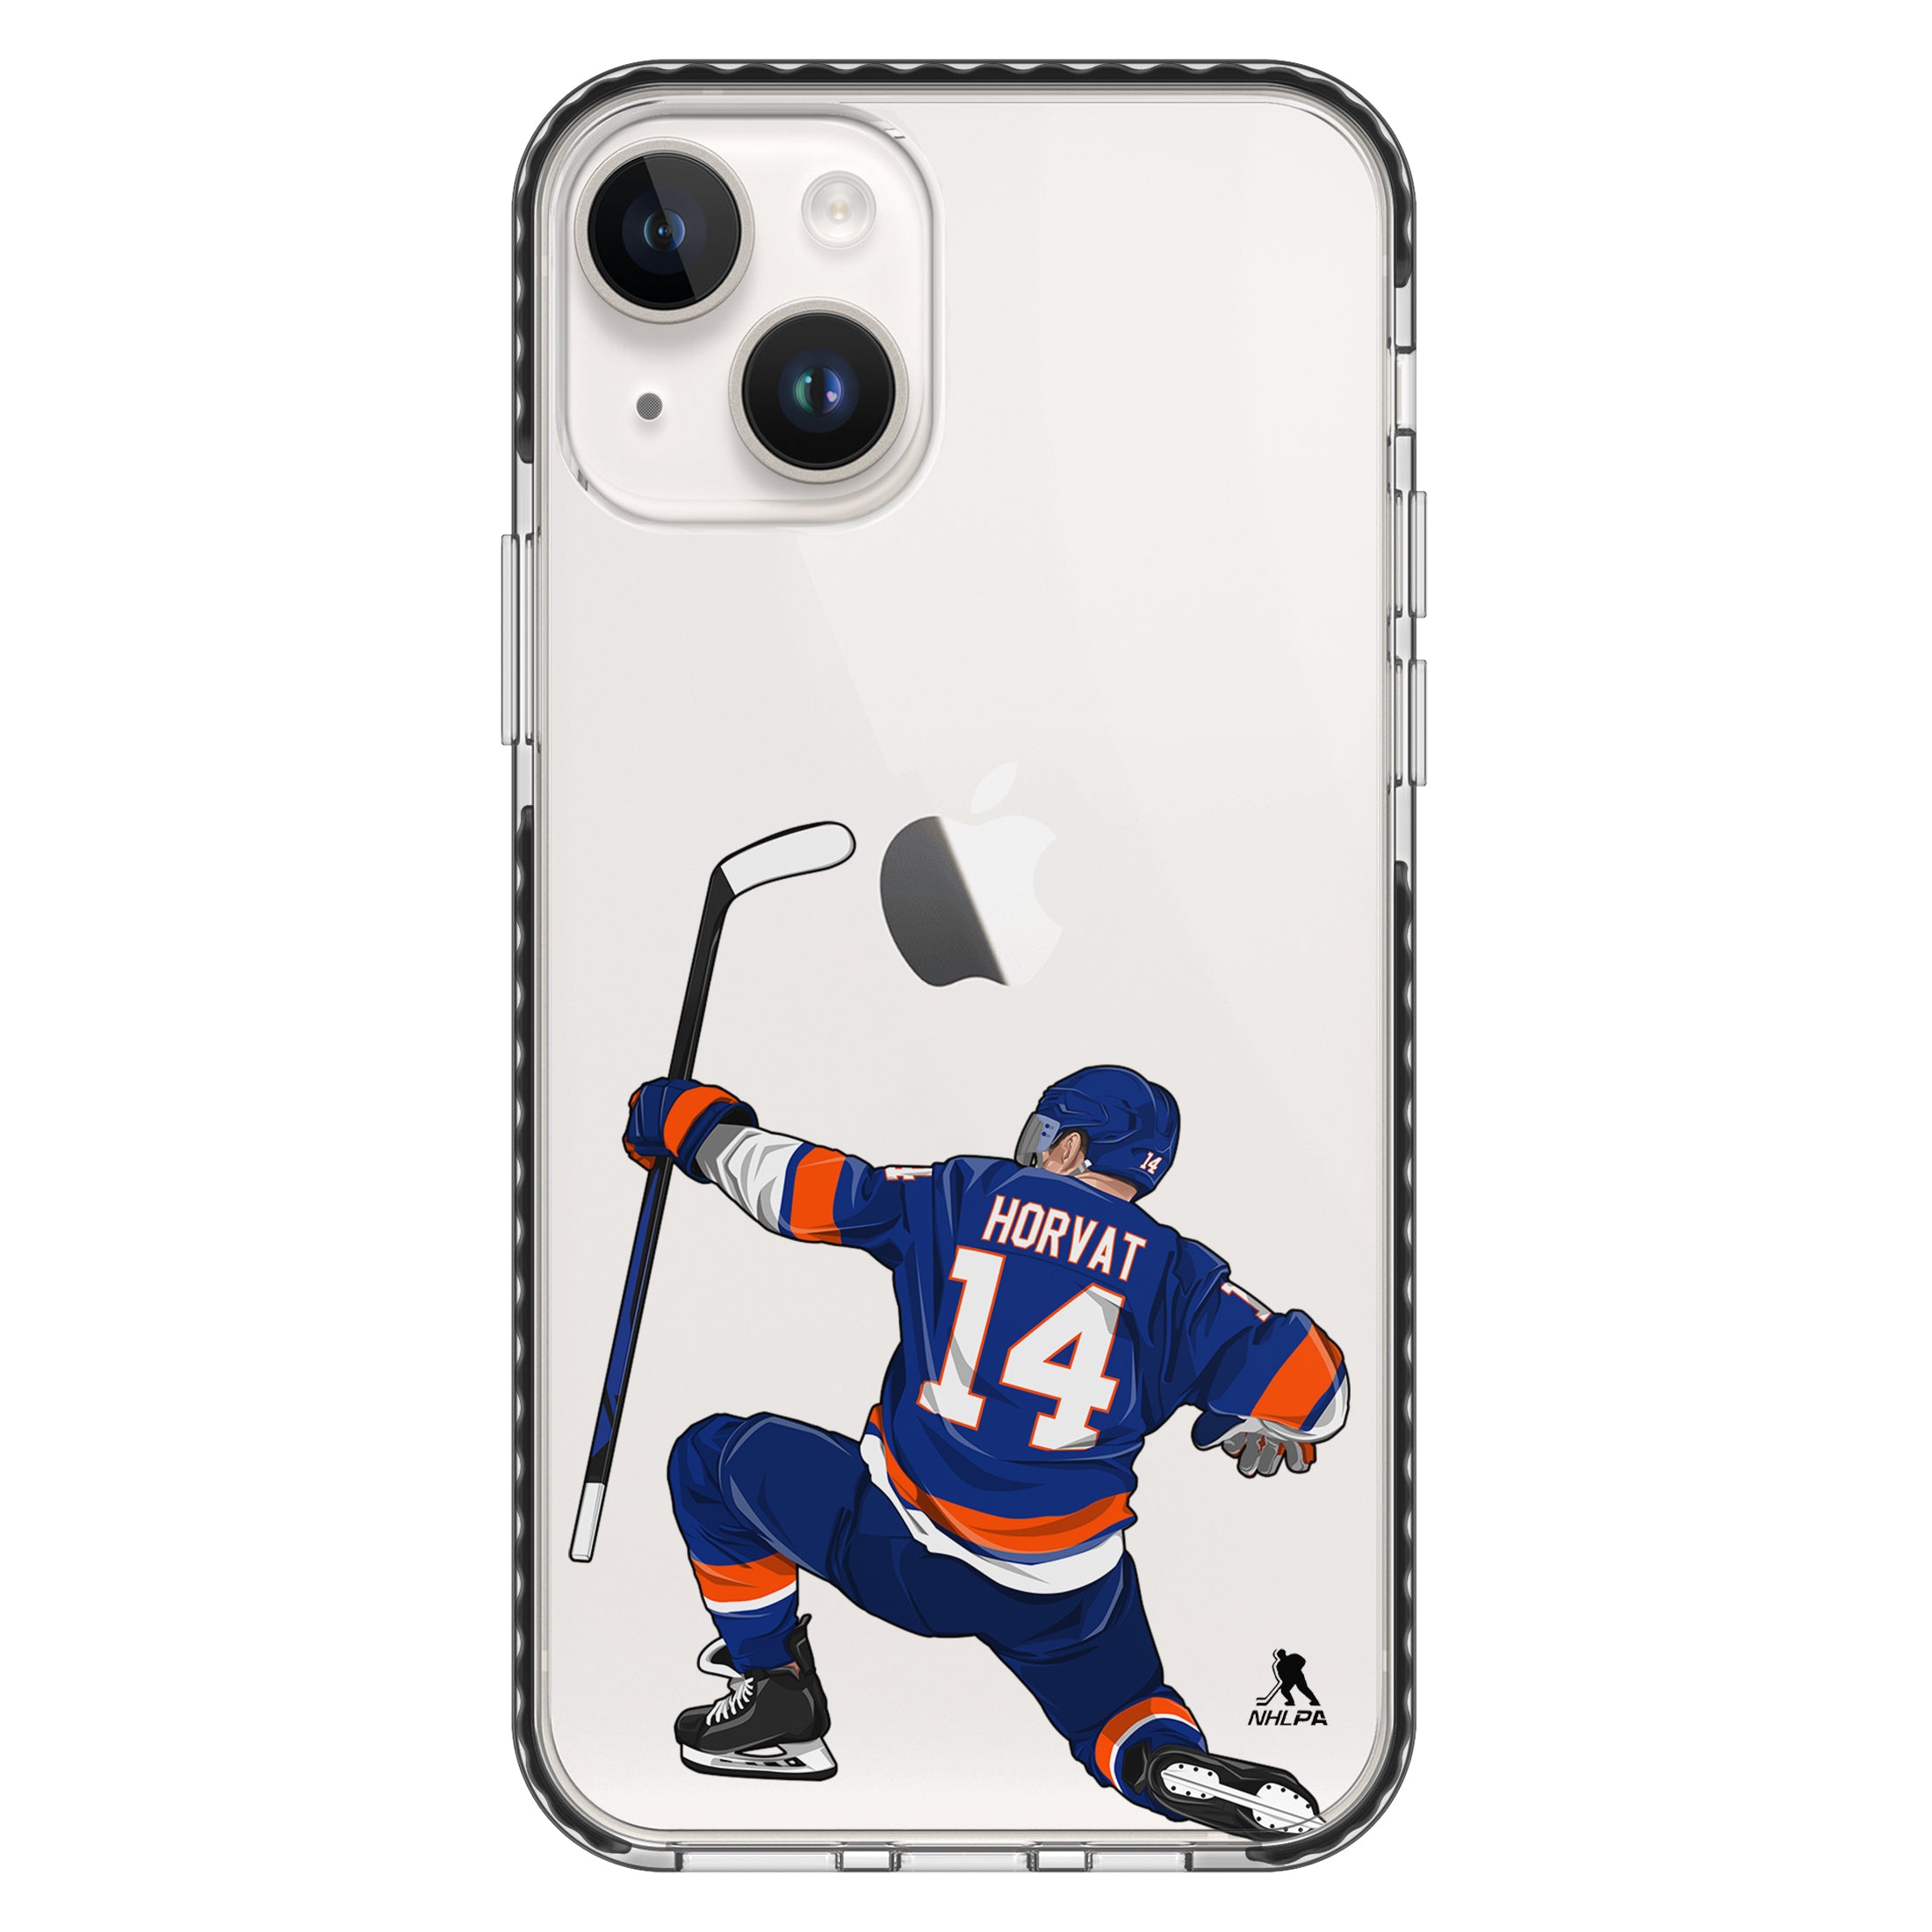 Horvat Clear Series 2.0 Phone Case